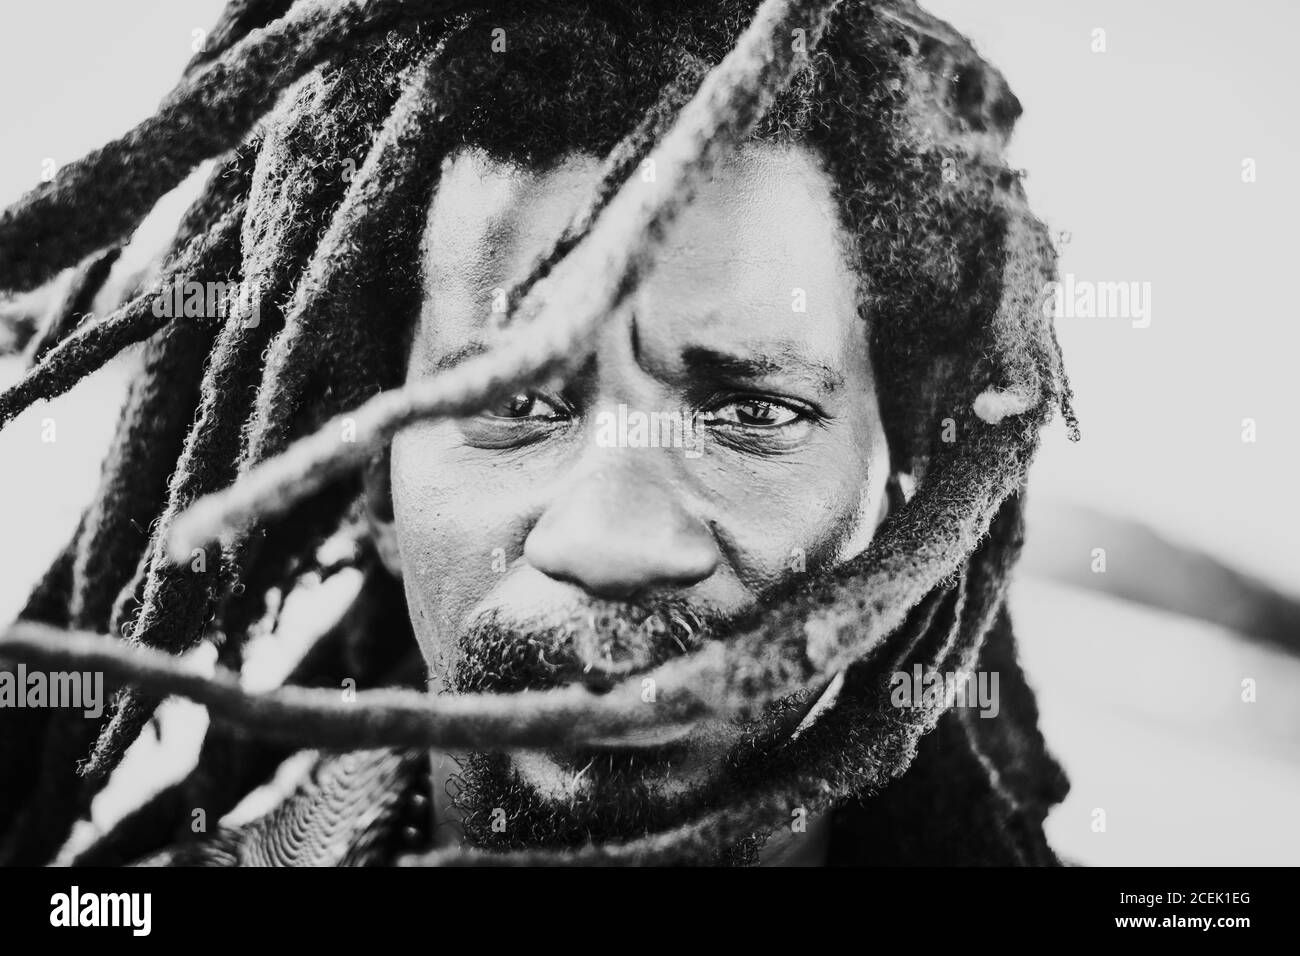 LA HABANA, CUBA - MAY 1, 2018: Black and white shot in close-up of ethnic serious man with dreadlocks flying in wind looking at camera. Stock Photo